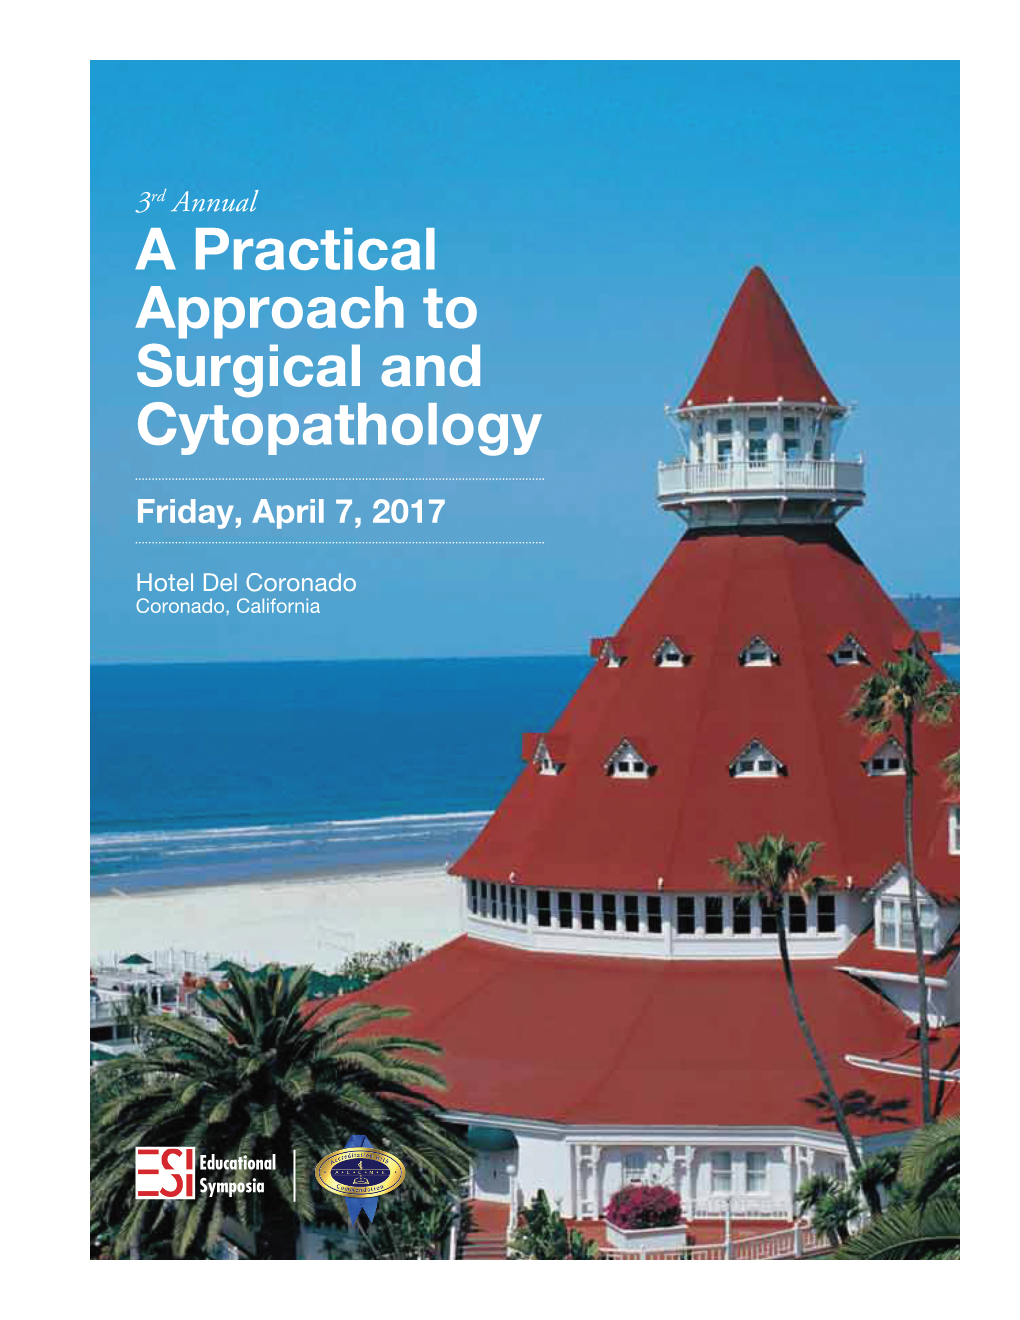 A Practical Approach to Surgical and Cytopathology